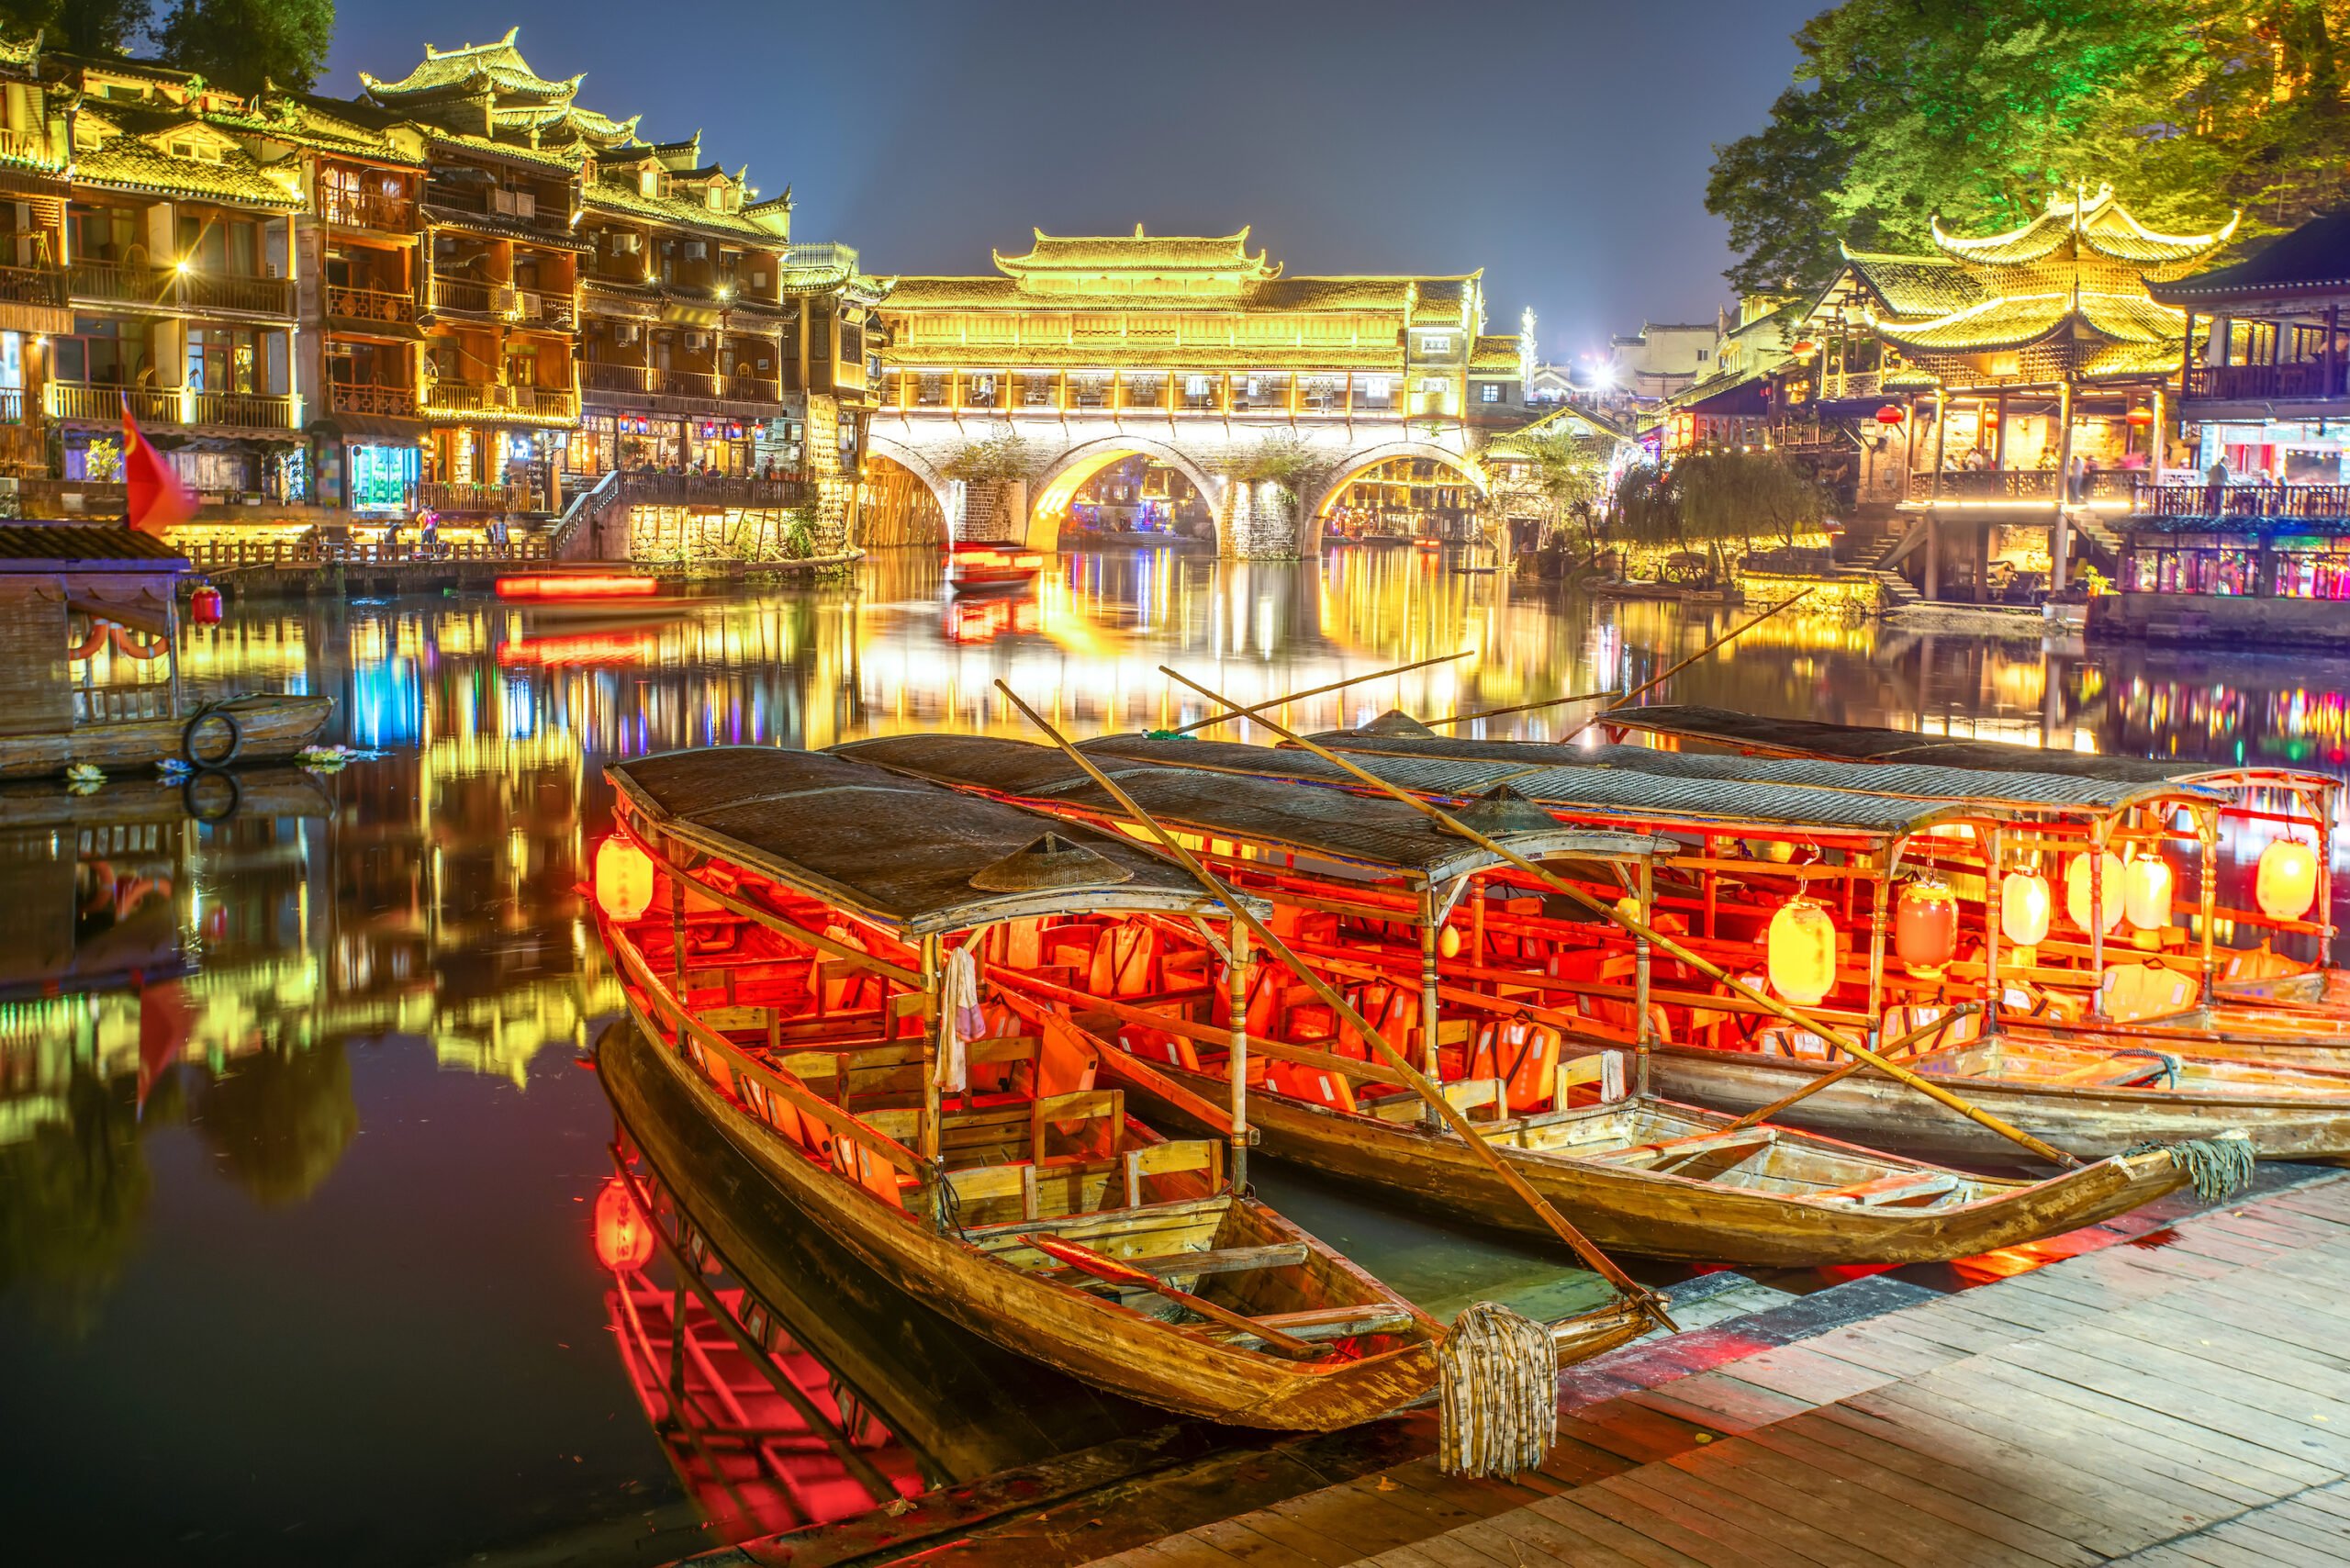 Beautiful Scenery Of Fenghuang Ancient Town In Our Zhangjiajie And Fenghuang 4 Day Package Tour